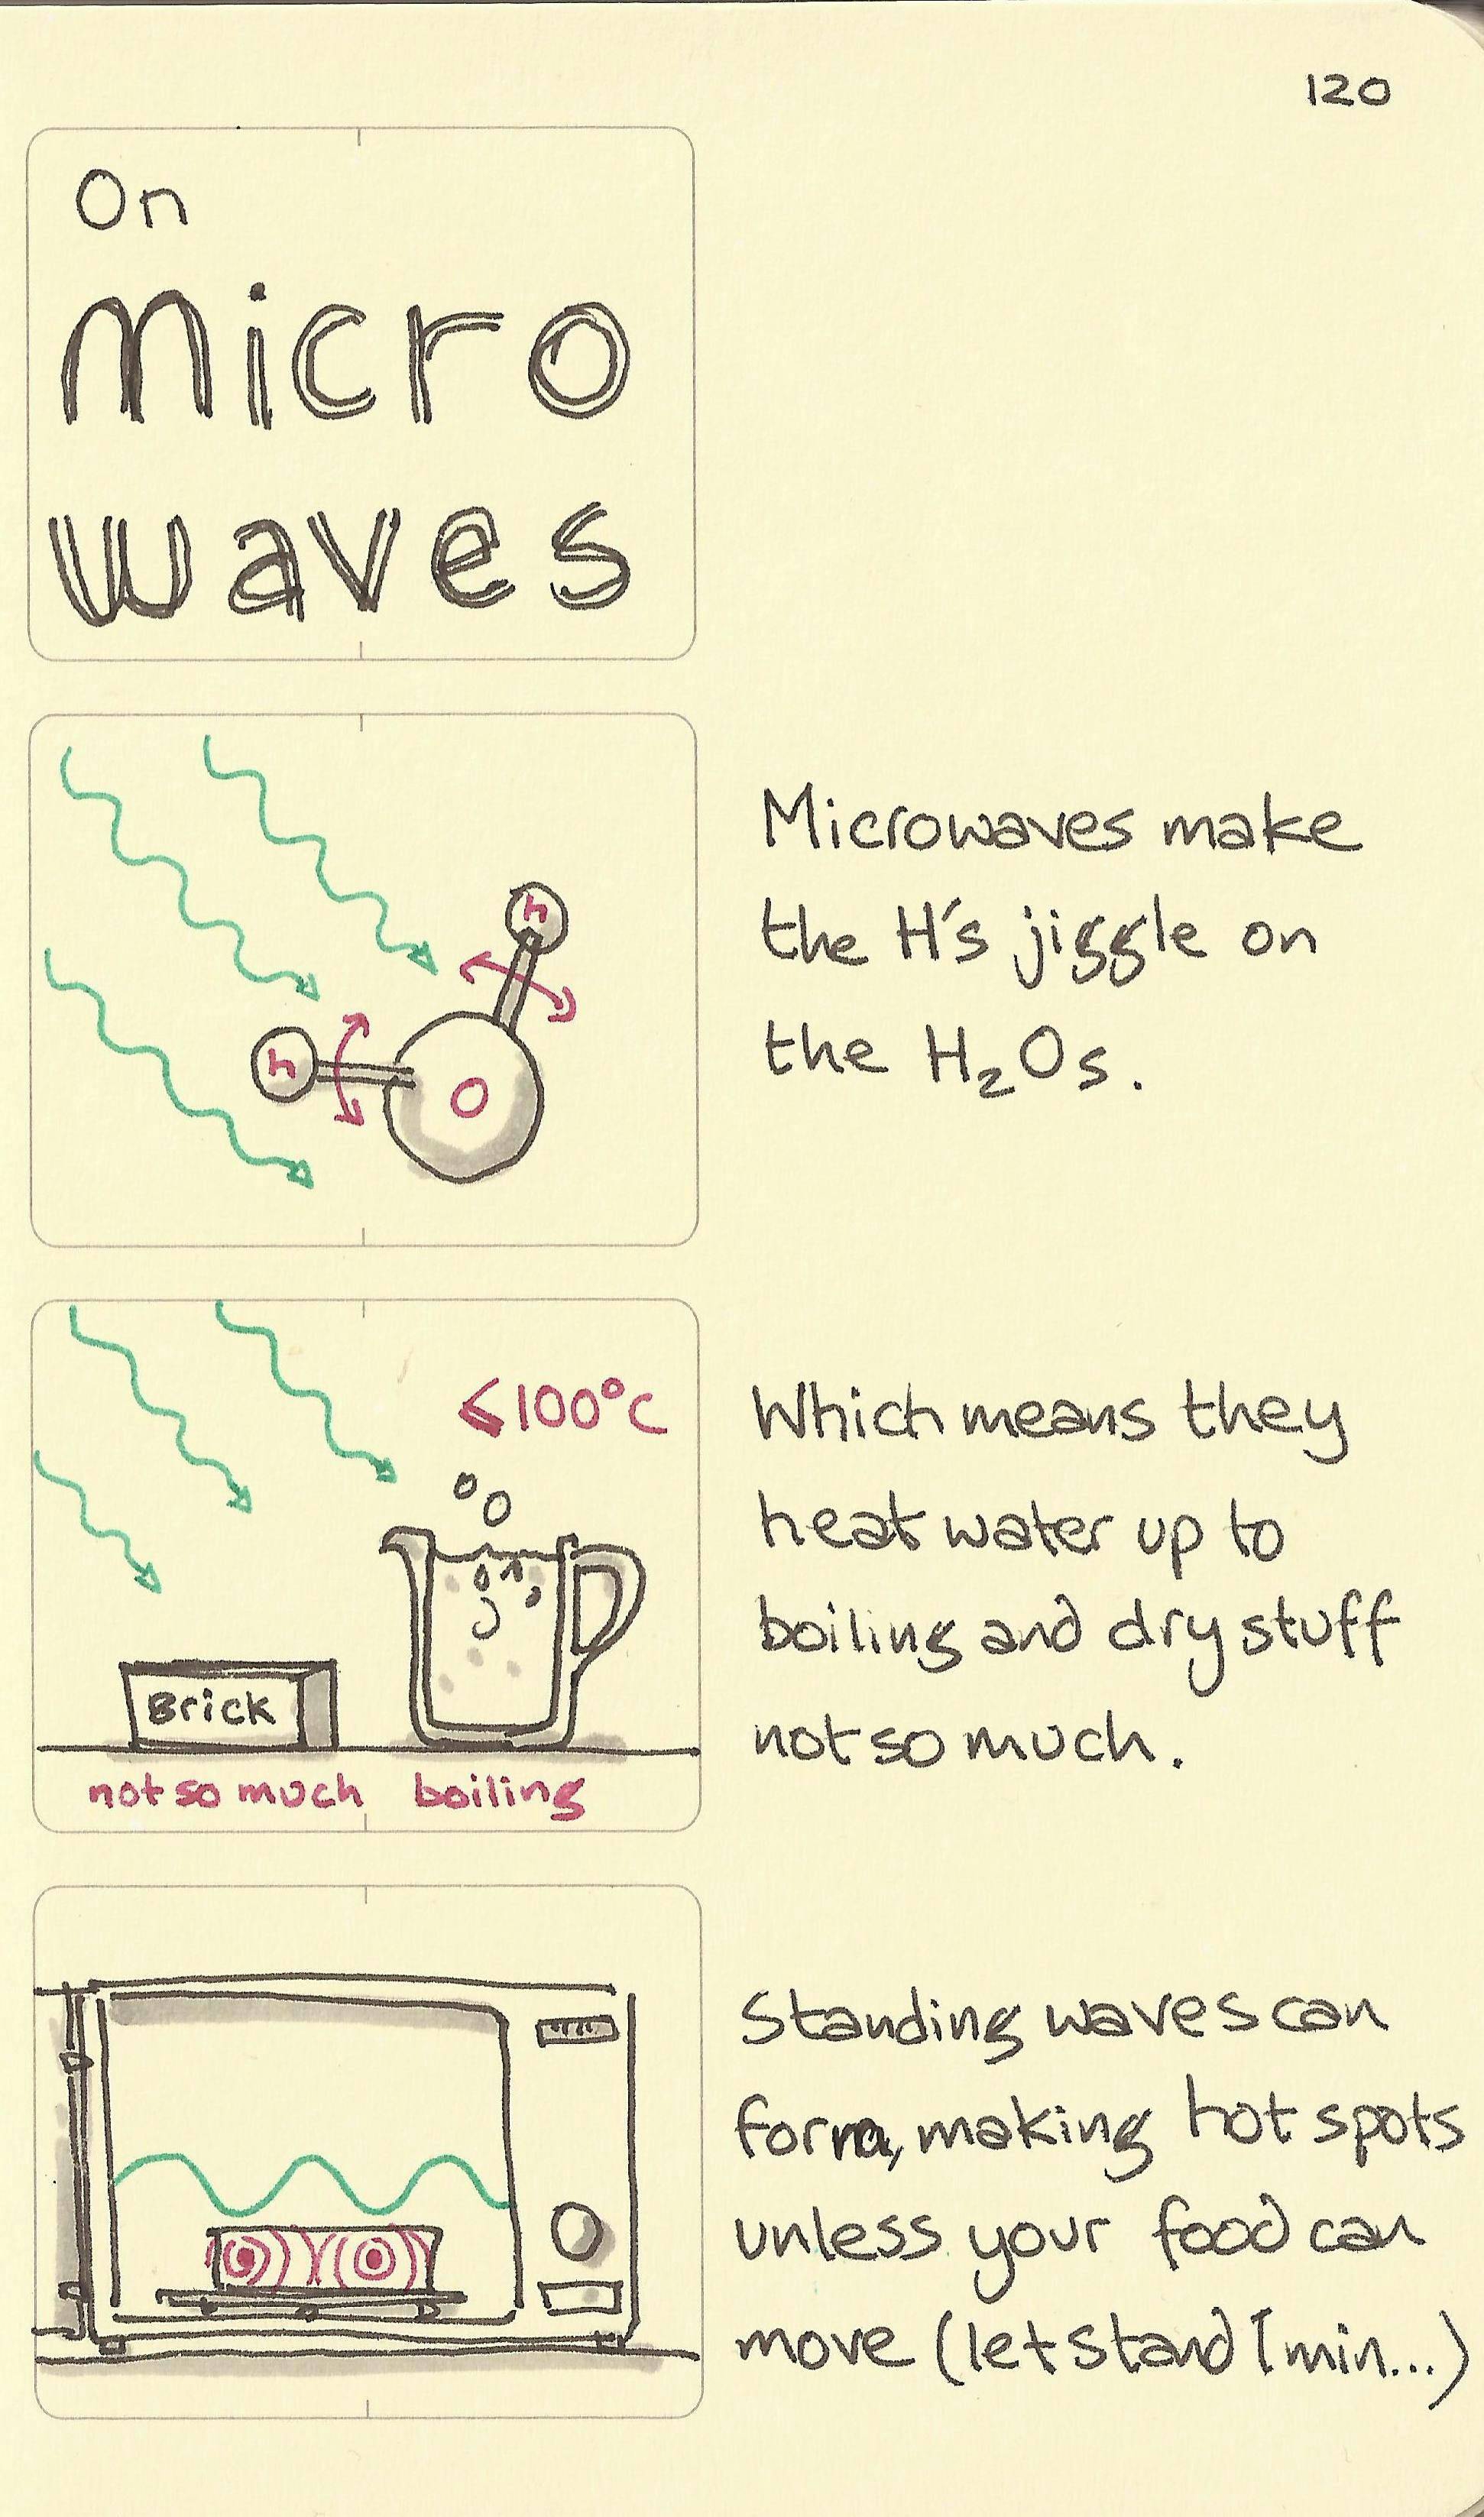 On microwaves - Sketchplanations